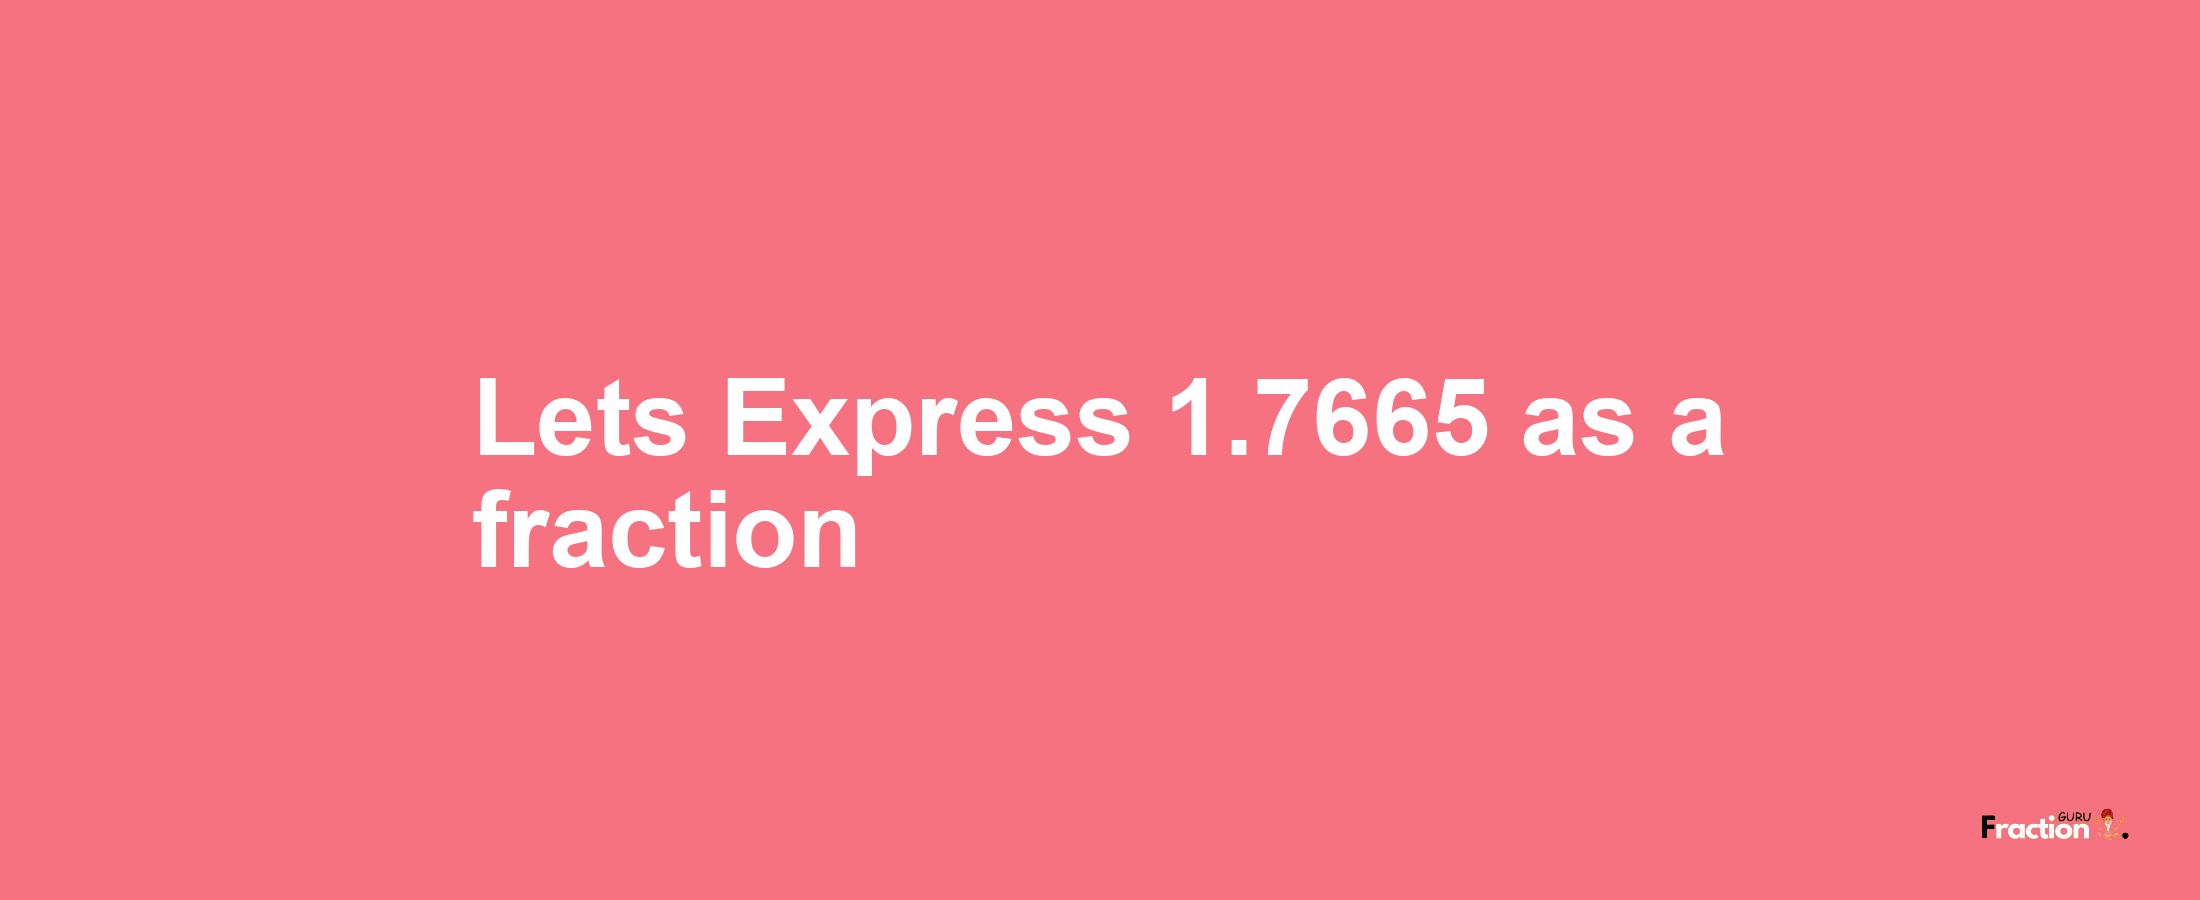 Lets Express 1.7665 as afraction